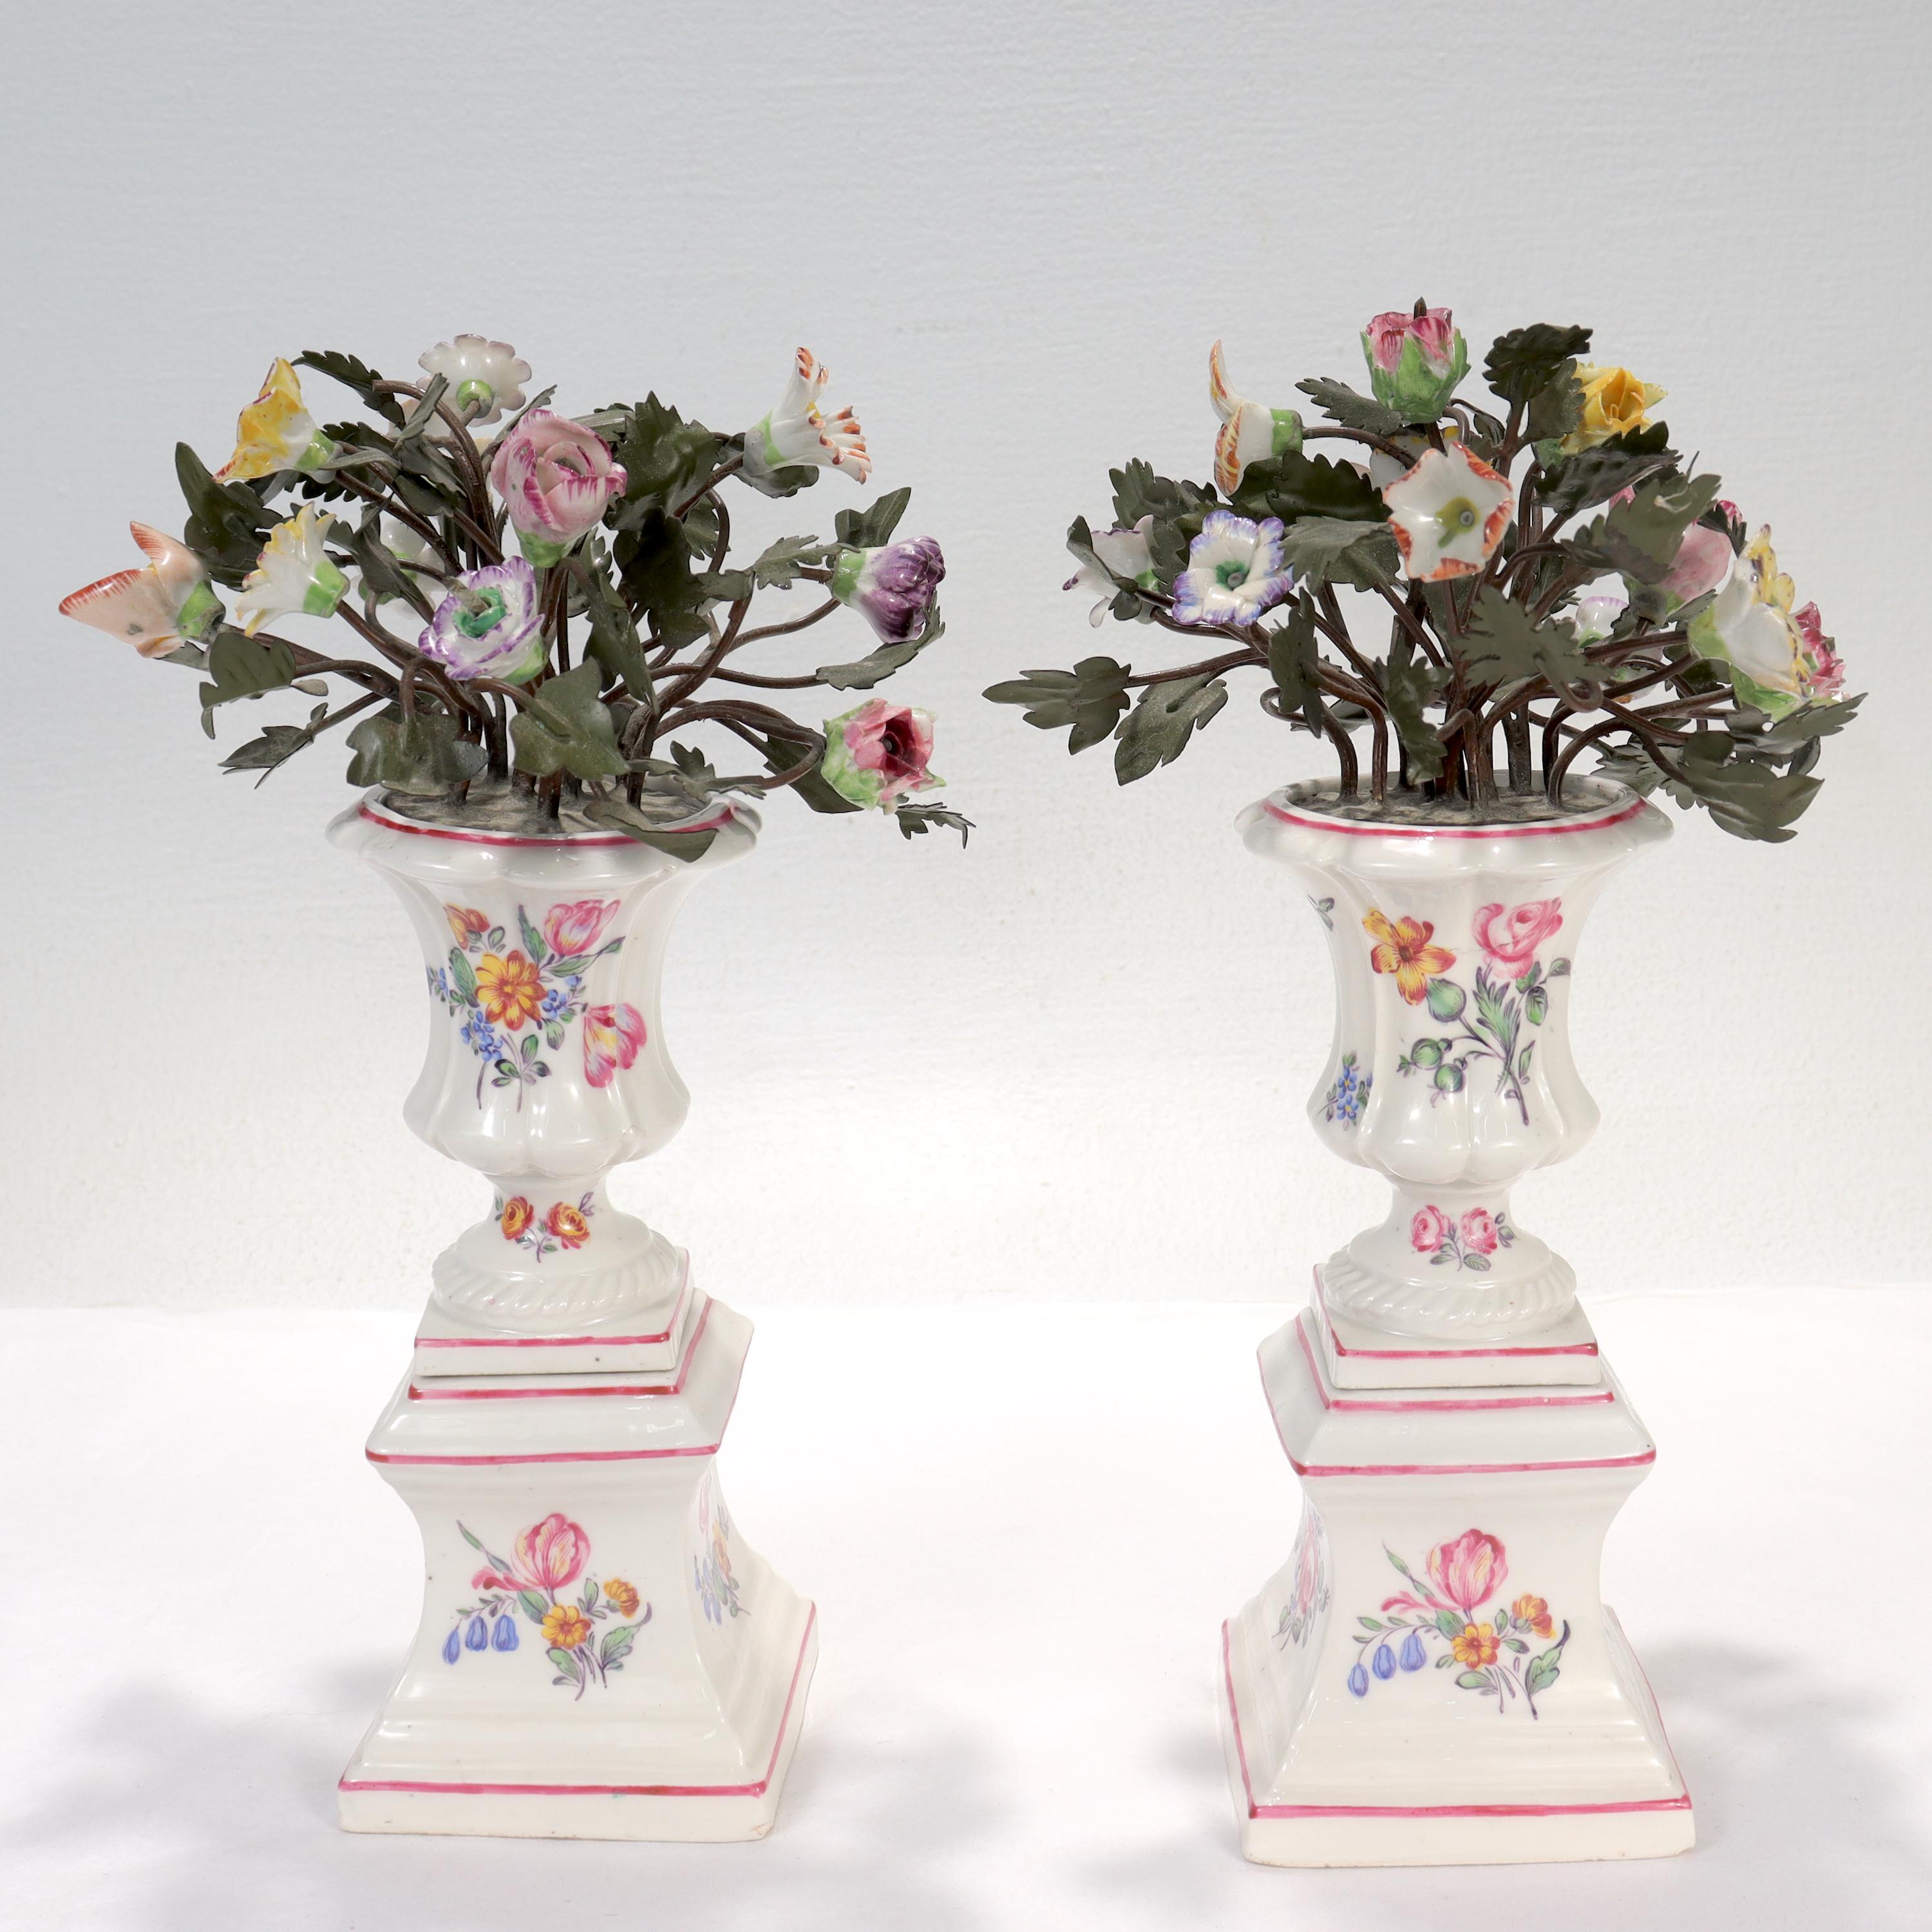 A fine pair of Samson tole peinte & porcelain flower vases or cachepots.

In the 18th Century Mennency style.

In the form of porcelain urns or vases hand painted with floral motifs holding painted 